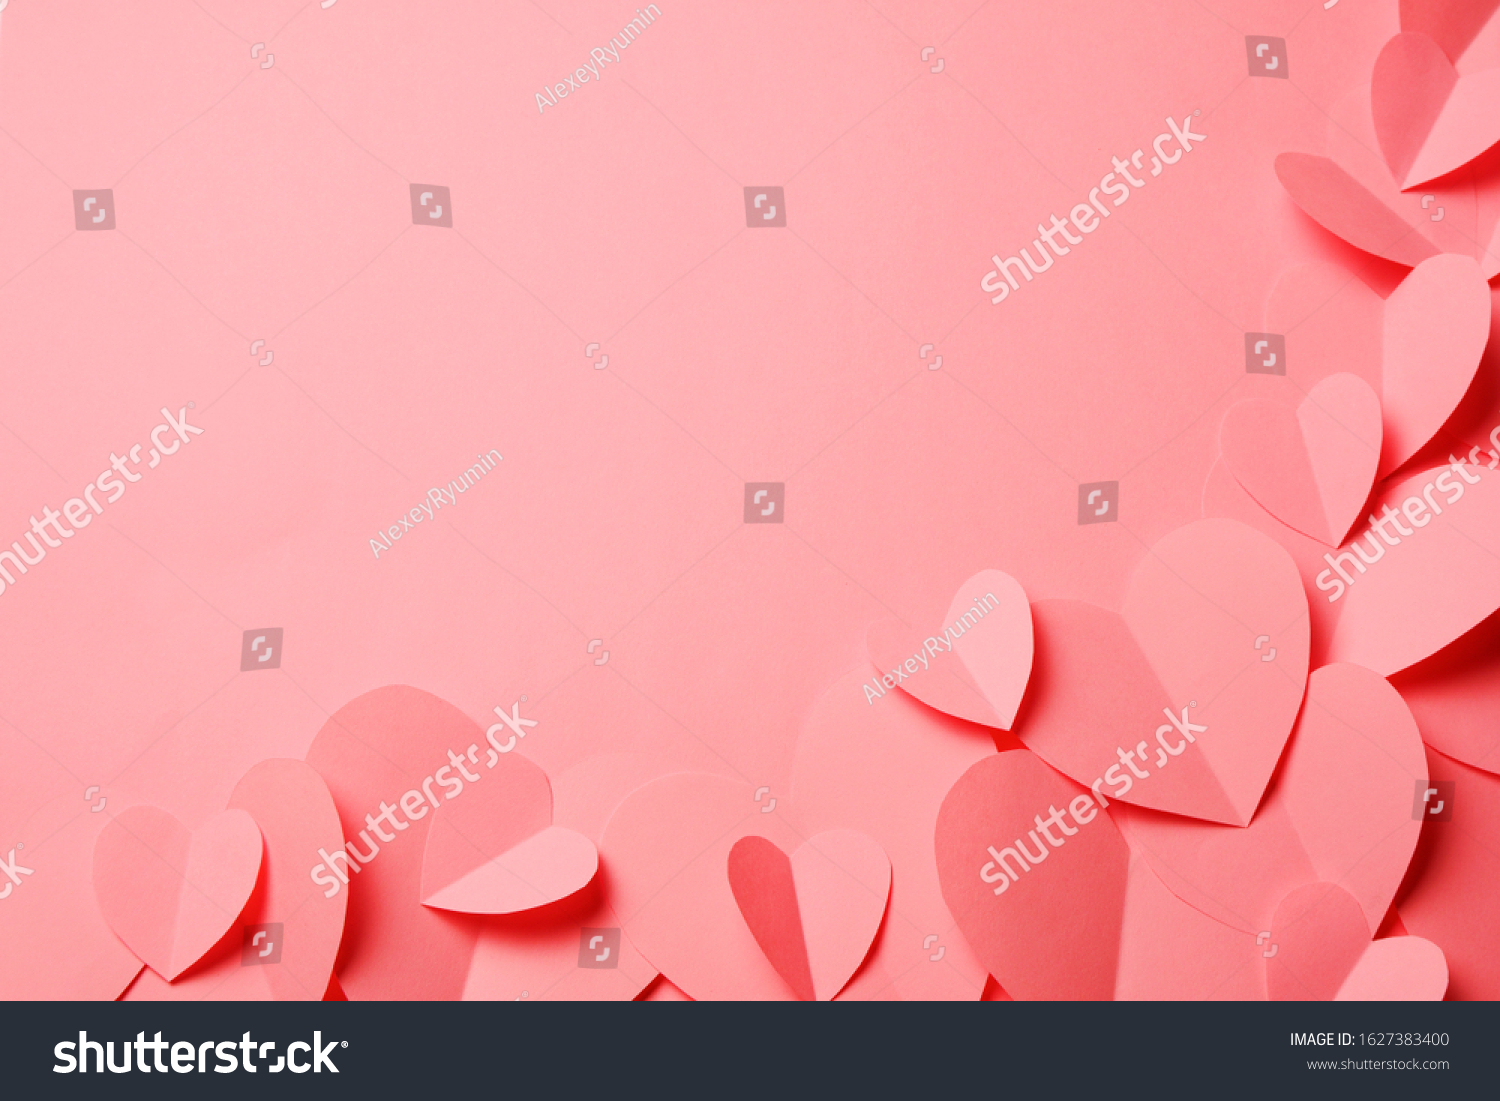 Cut out of pink paper hearts on pink background. Good Valentines day, Womans day, love, romantic or wedding composition with copy space for your text for banner, congratulation, card, offer, flyer, advertising, invitation.